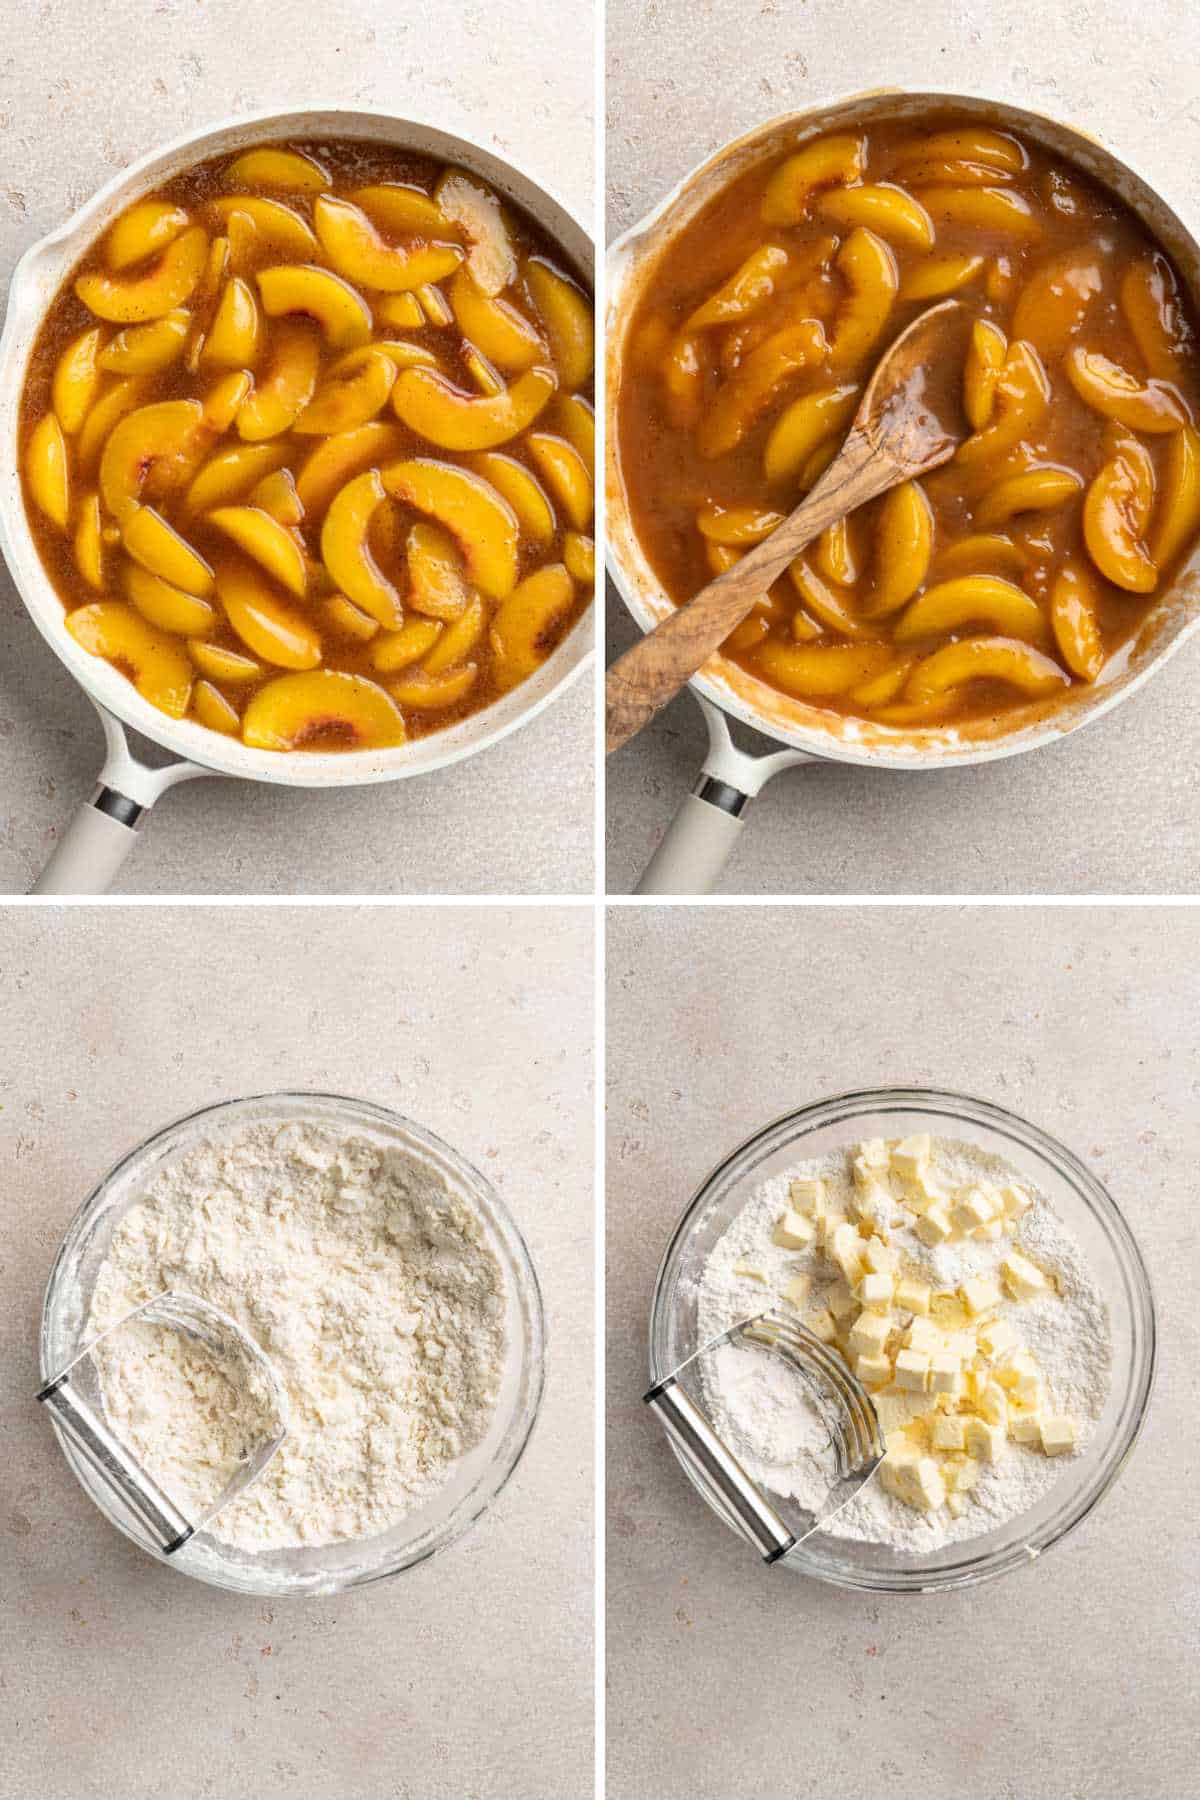 Collage of images including cooking the peaches in syrup and making the pie crust for the cobbler.